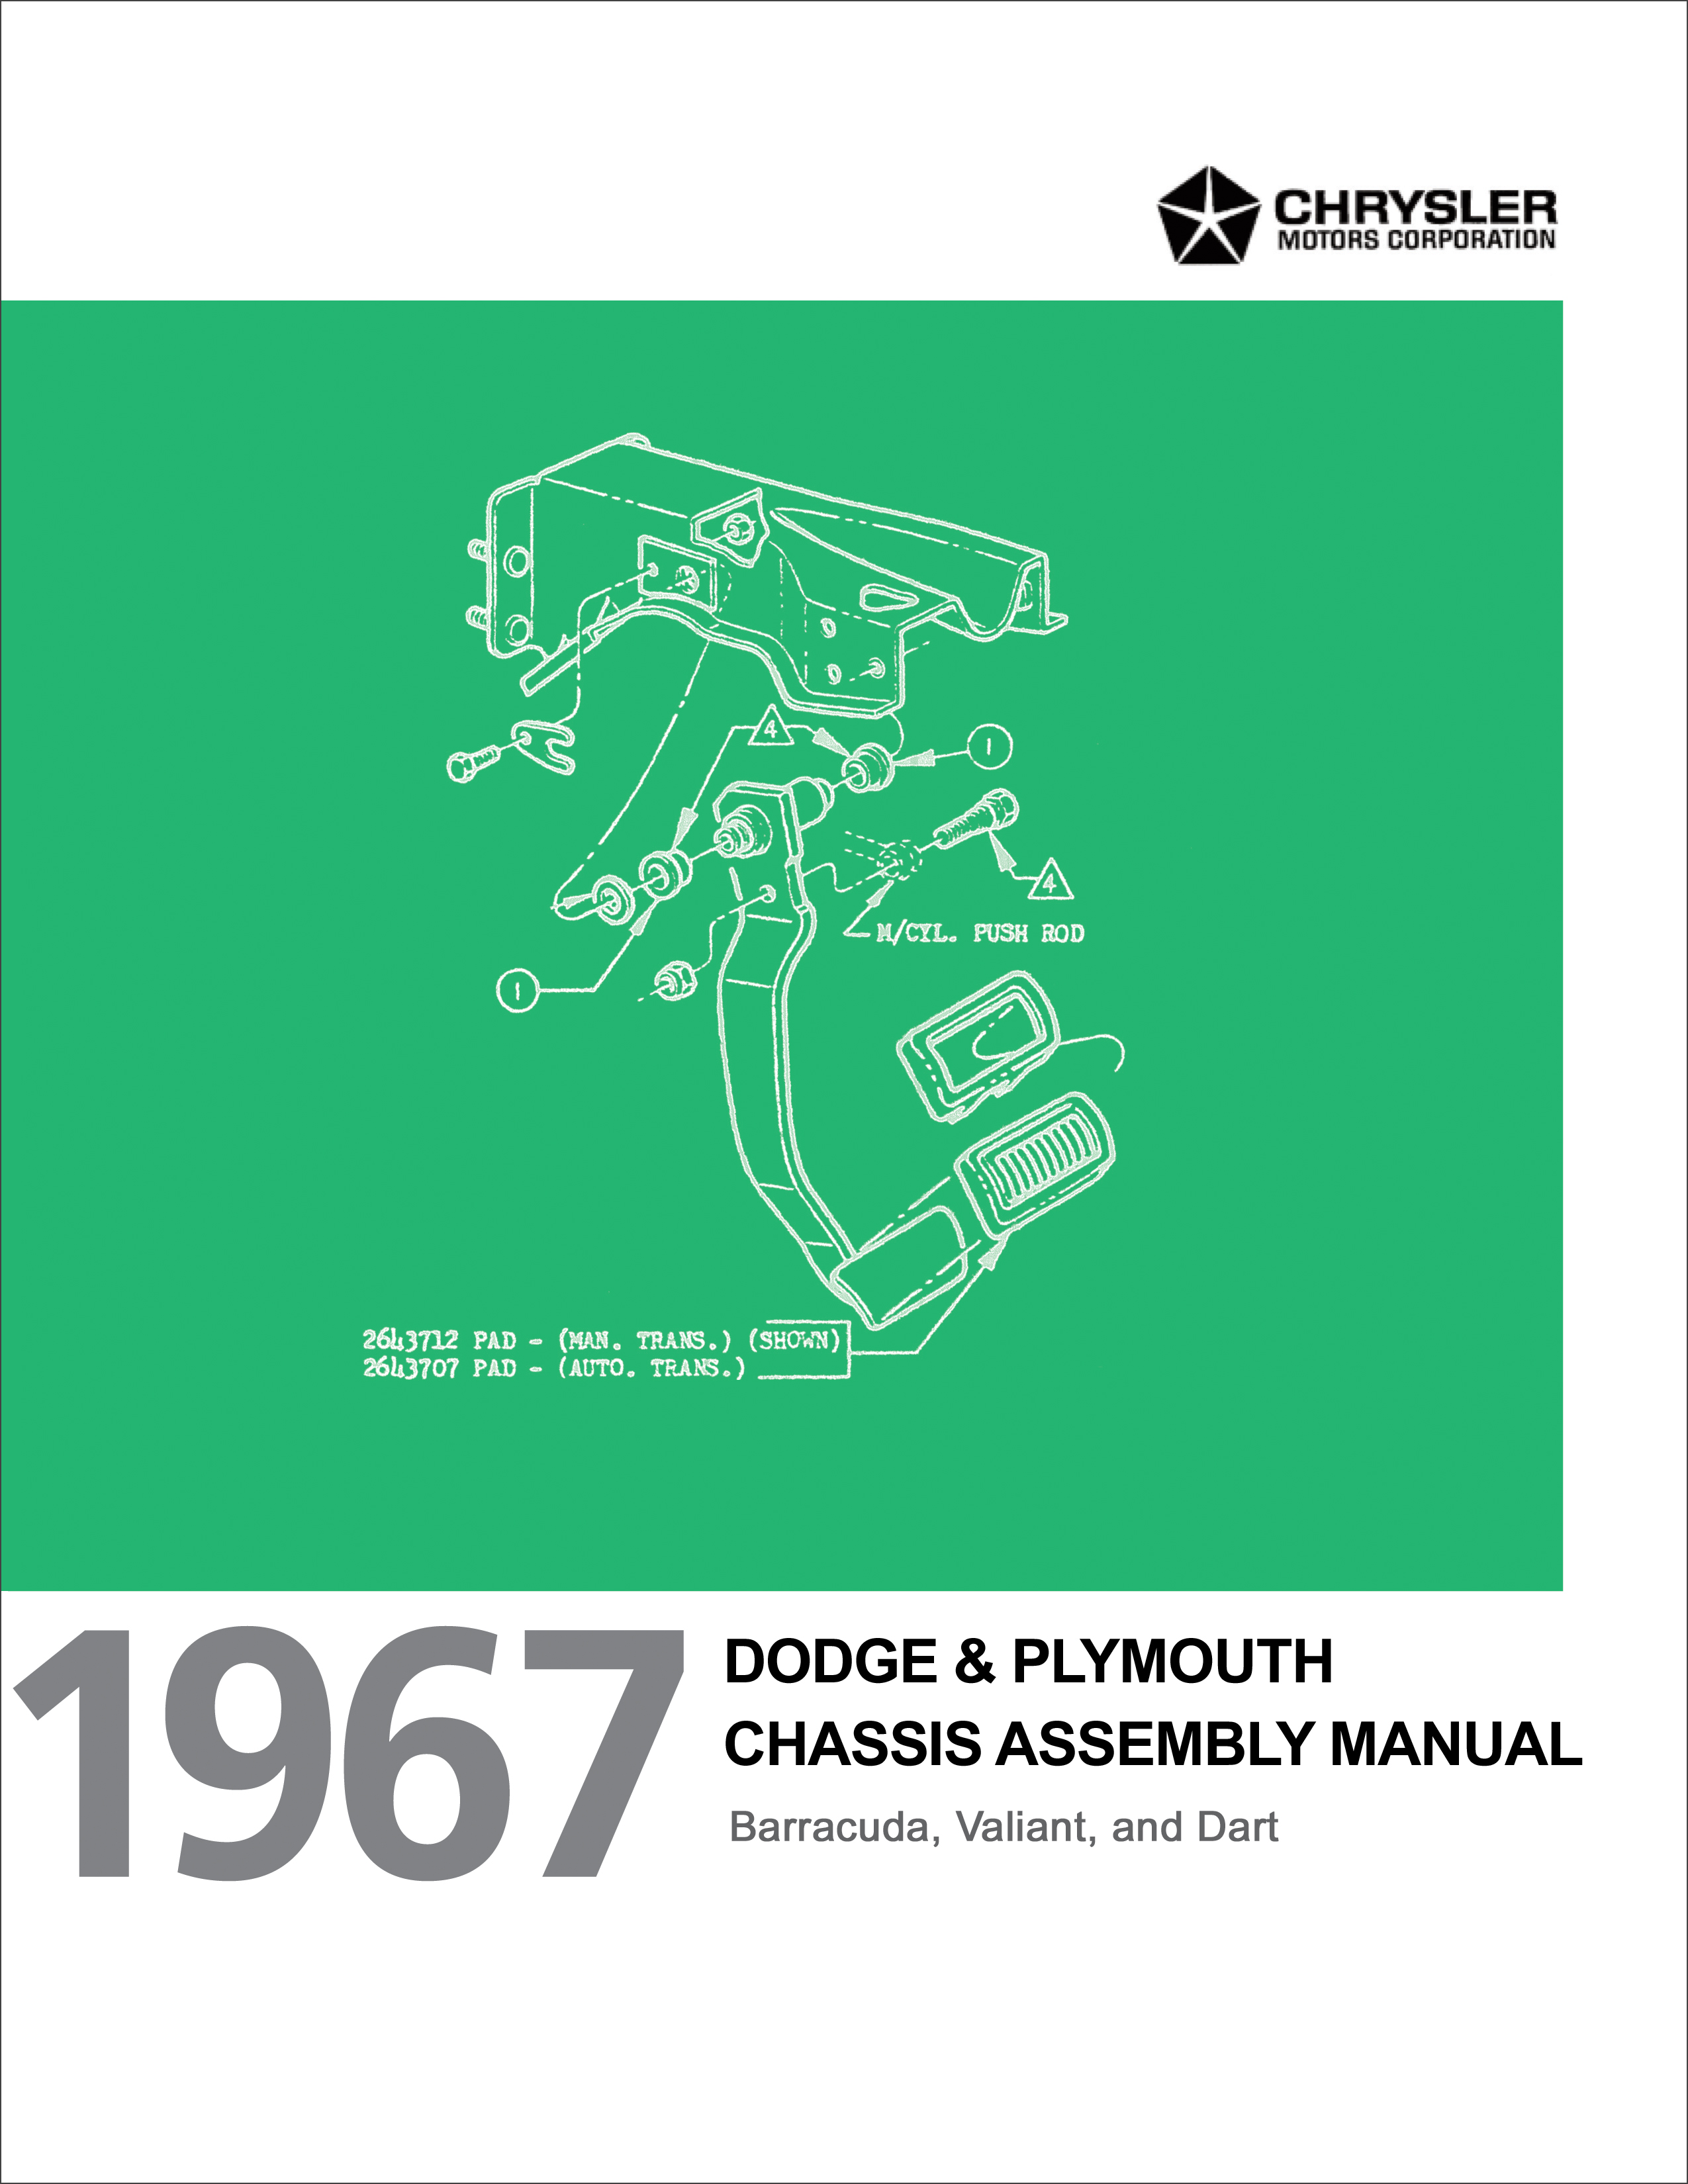 1967 Dart, Valiant, and Barracuda Chassis and Engine Equipment Assembly Manual Reprint